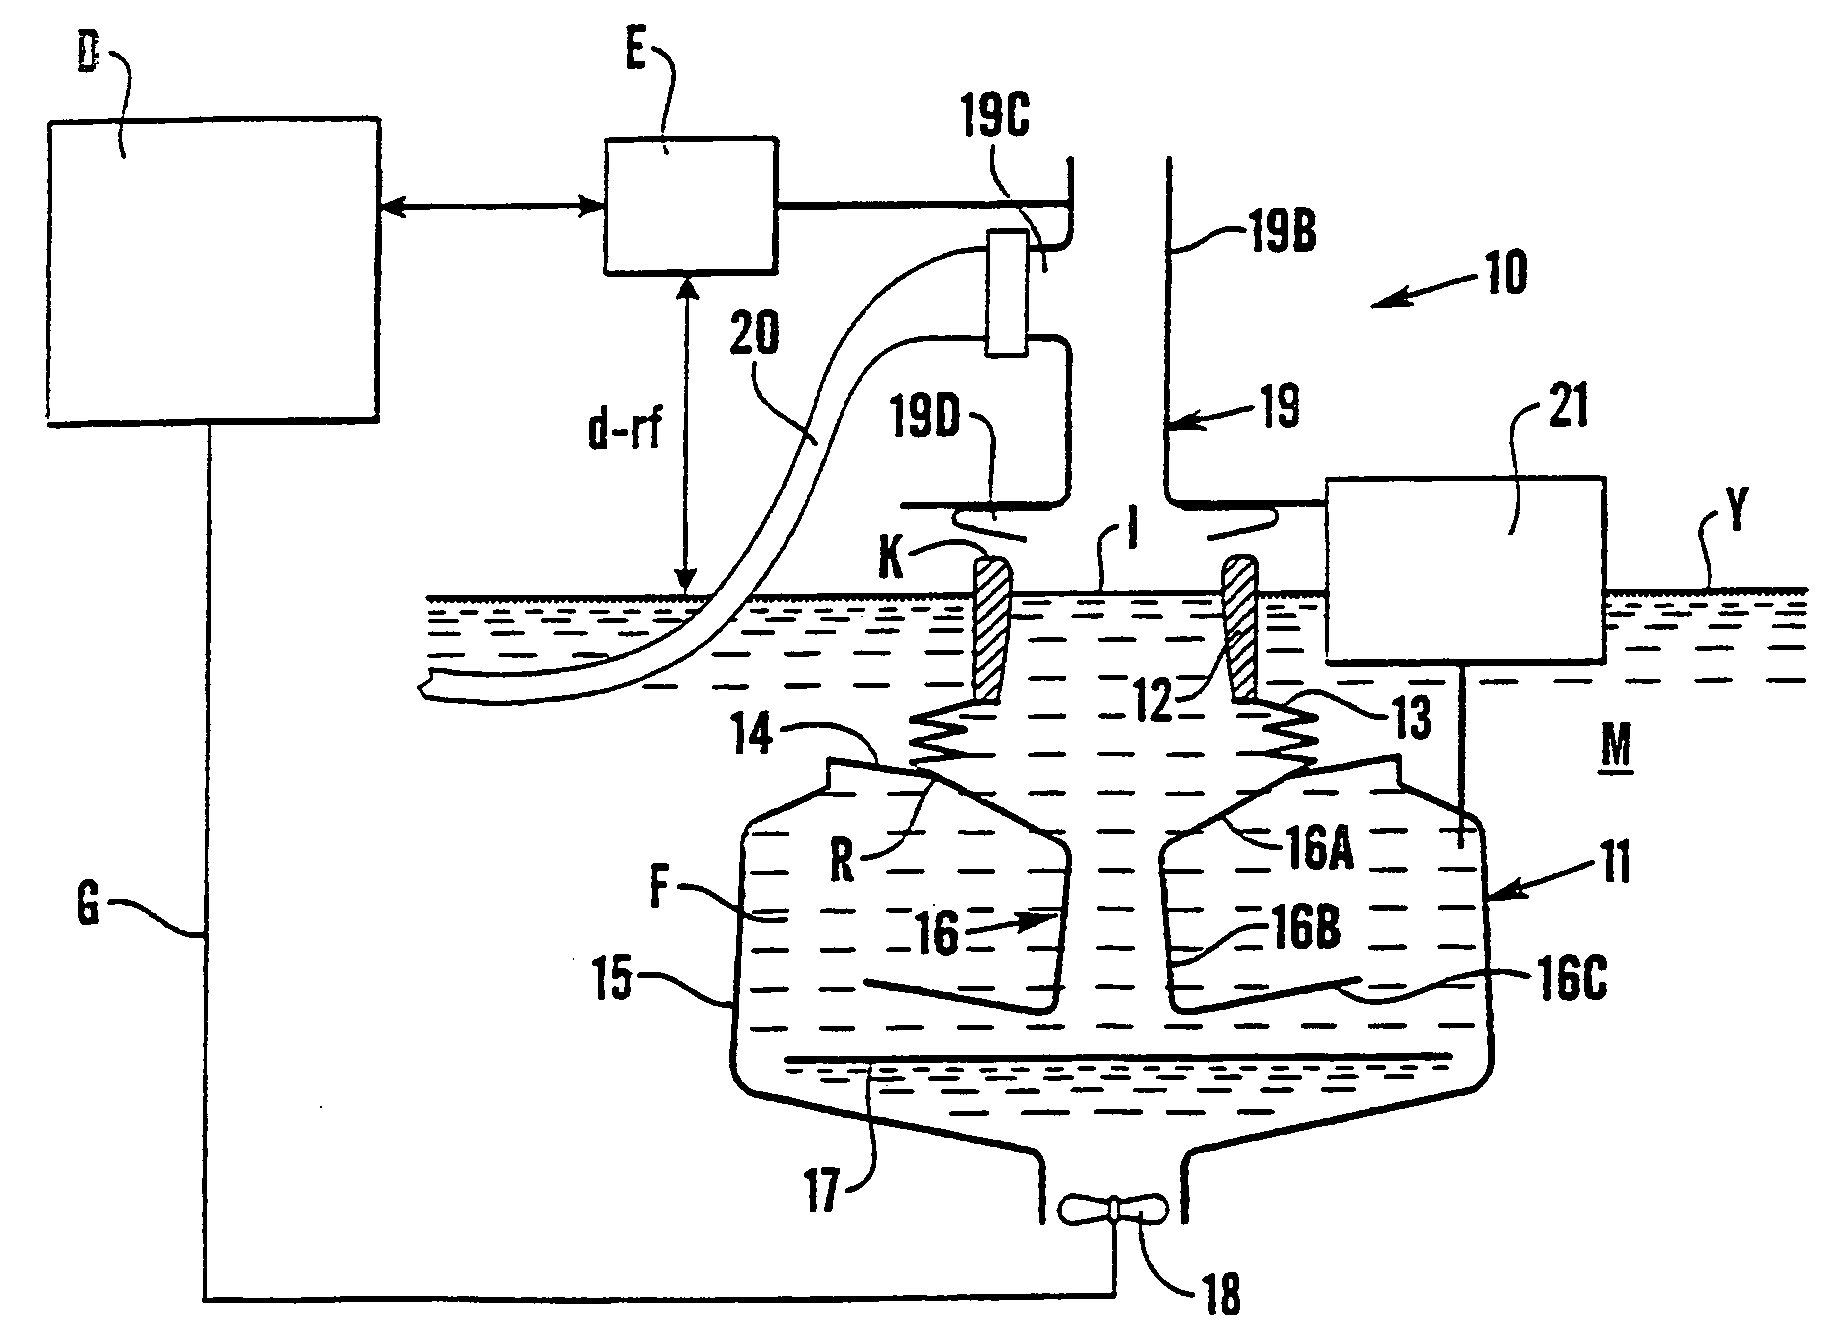 Method and apparatus for collecting pollutants in a body of water